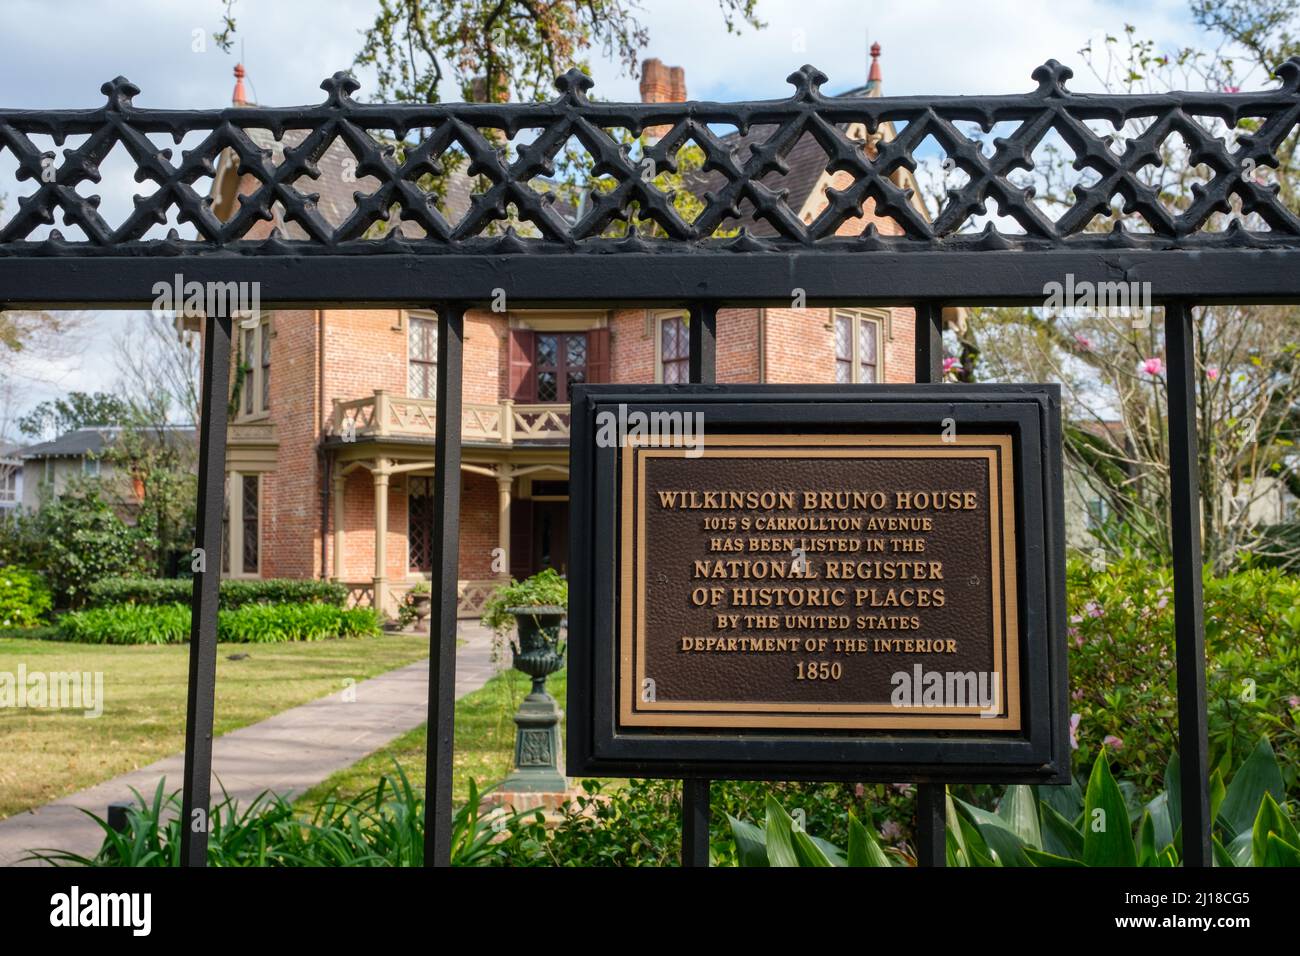 NEW ORLEANS, LA, USA - MARCH 16, 2022: National Register of Historic Places marker on the fence of the gothic style Wilkinson Bruno House on Carrollto Stock Photo